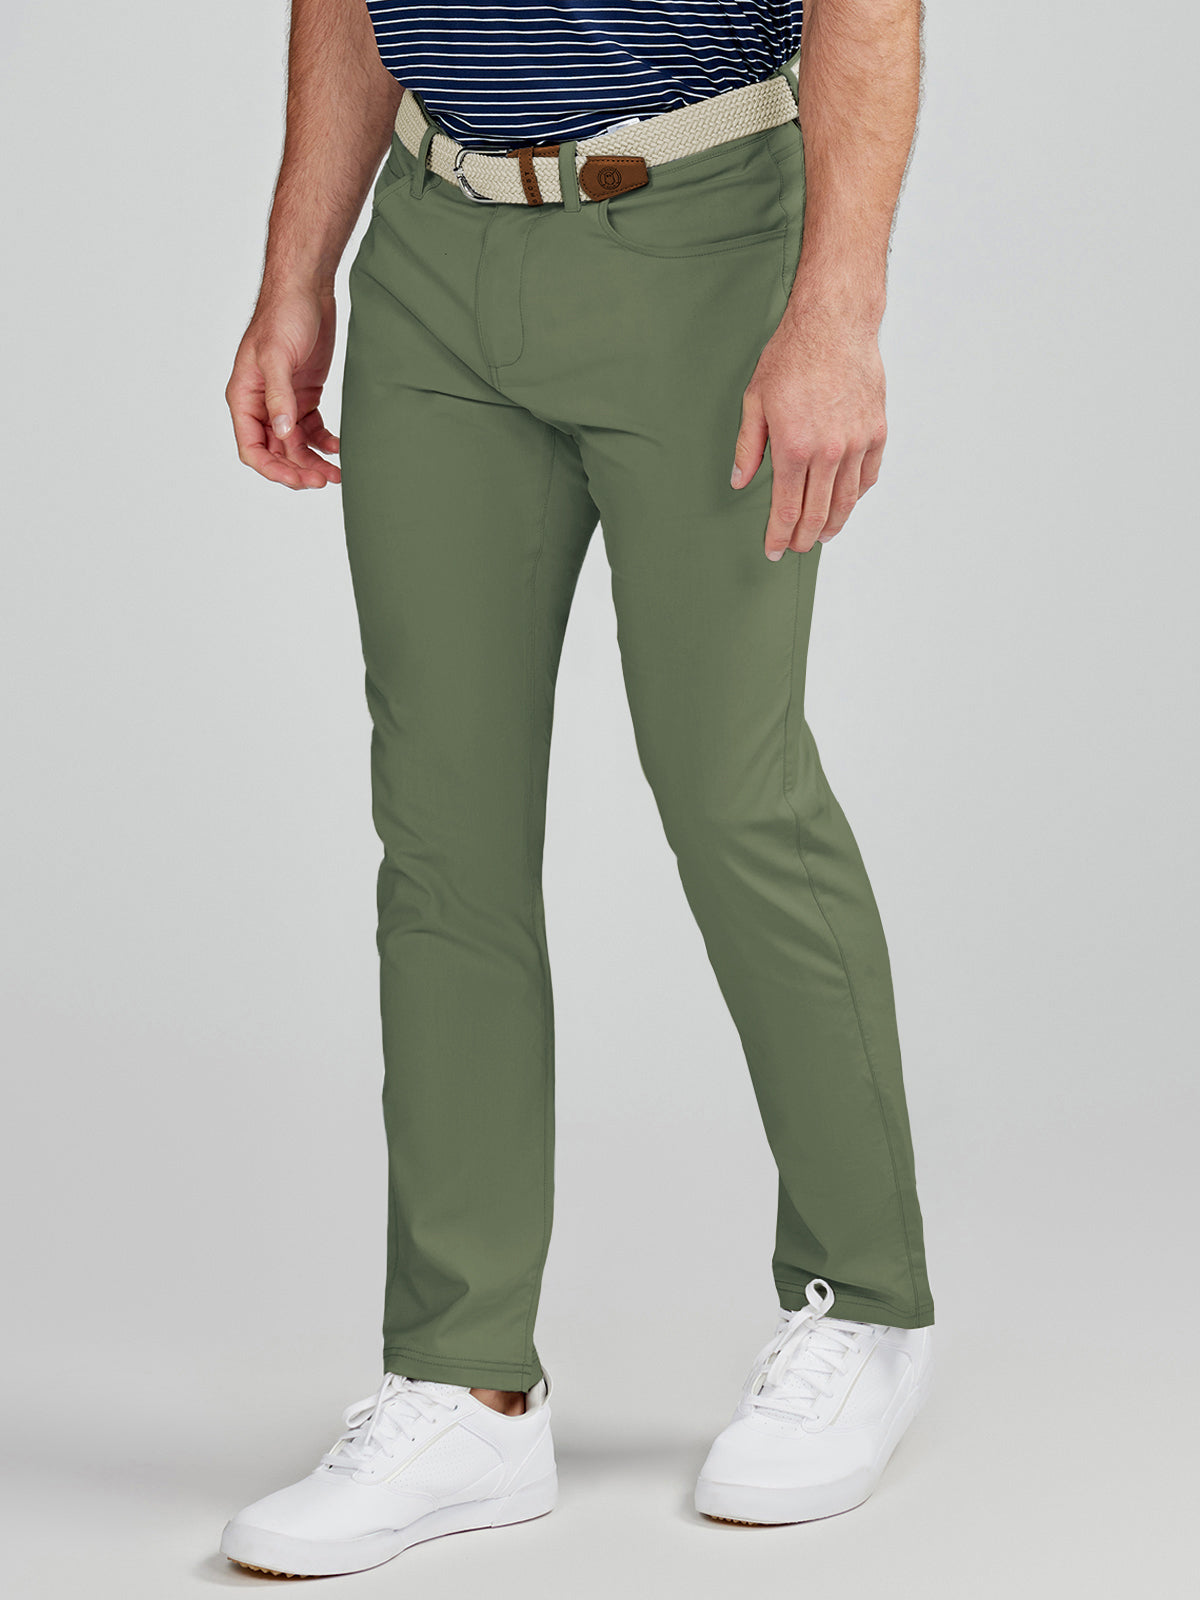 Motion Pant Tailored Fit - tasc performance (Olive)